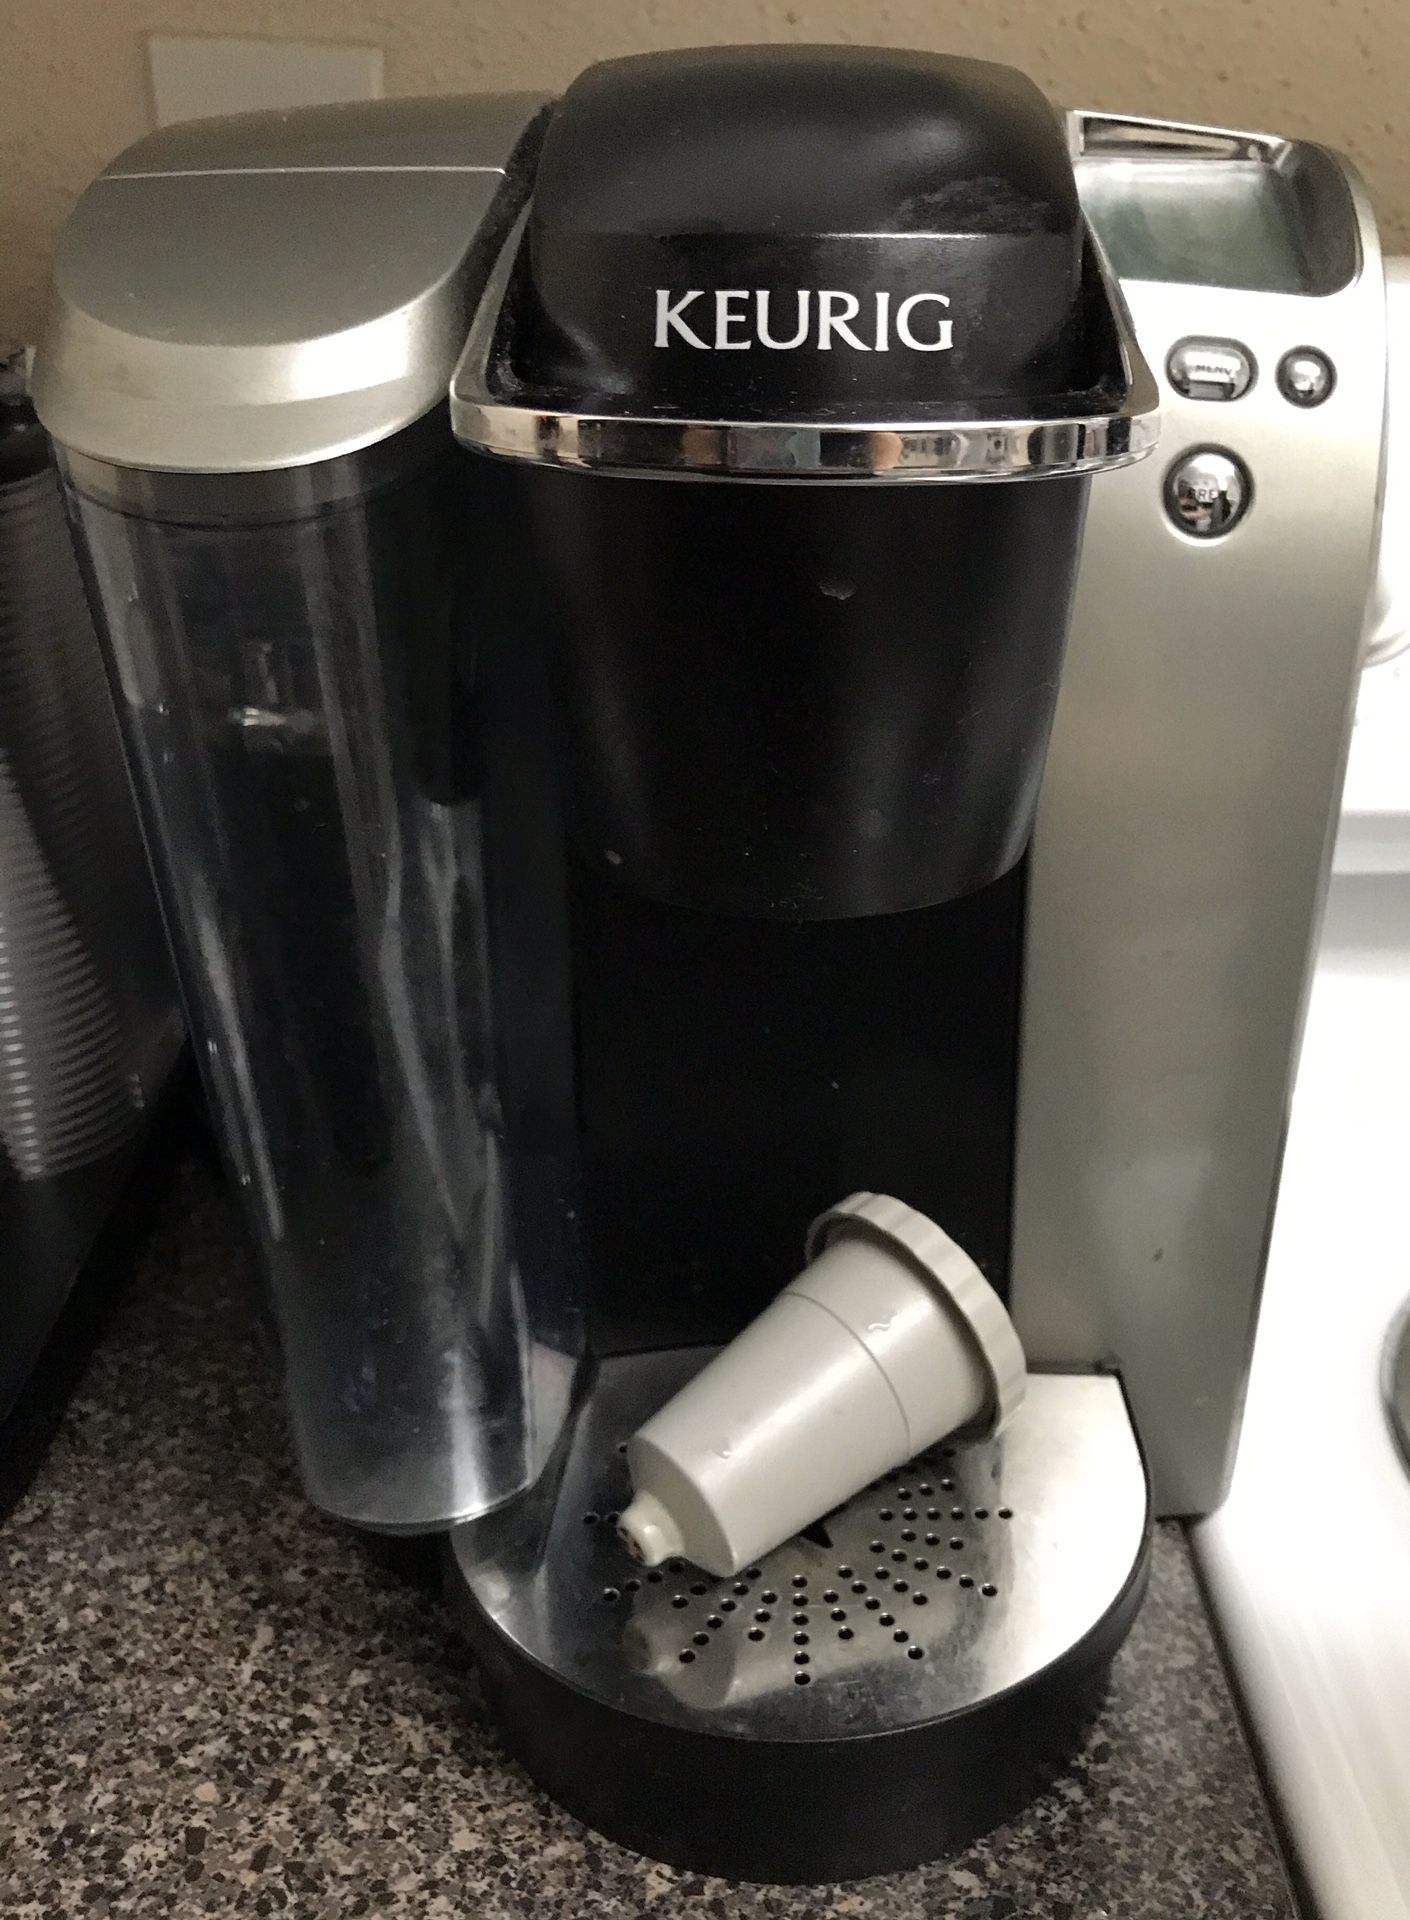 Keurig coffee maker, pod holder and Peet’s coffee and a variety of other pods